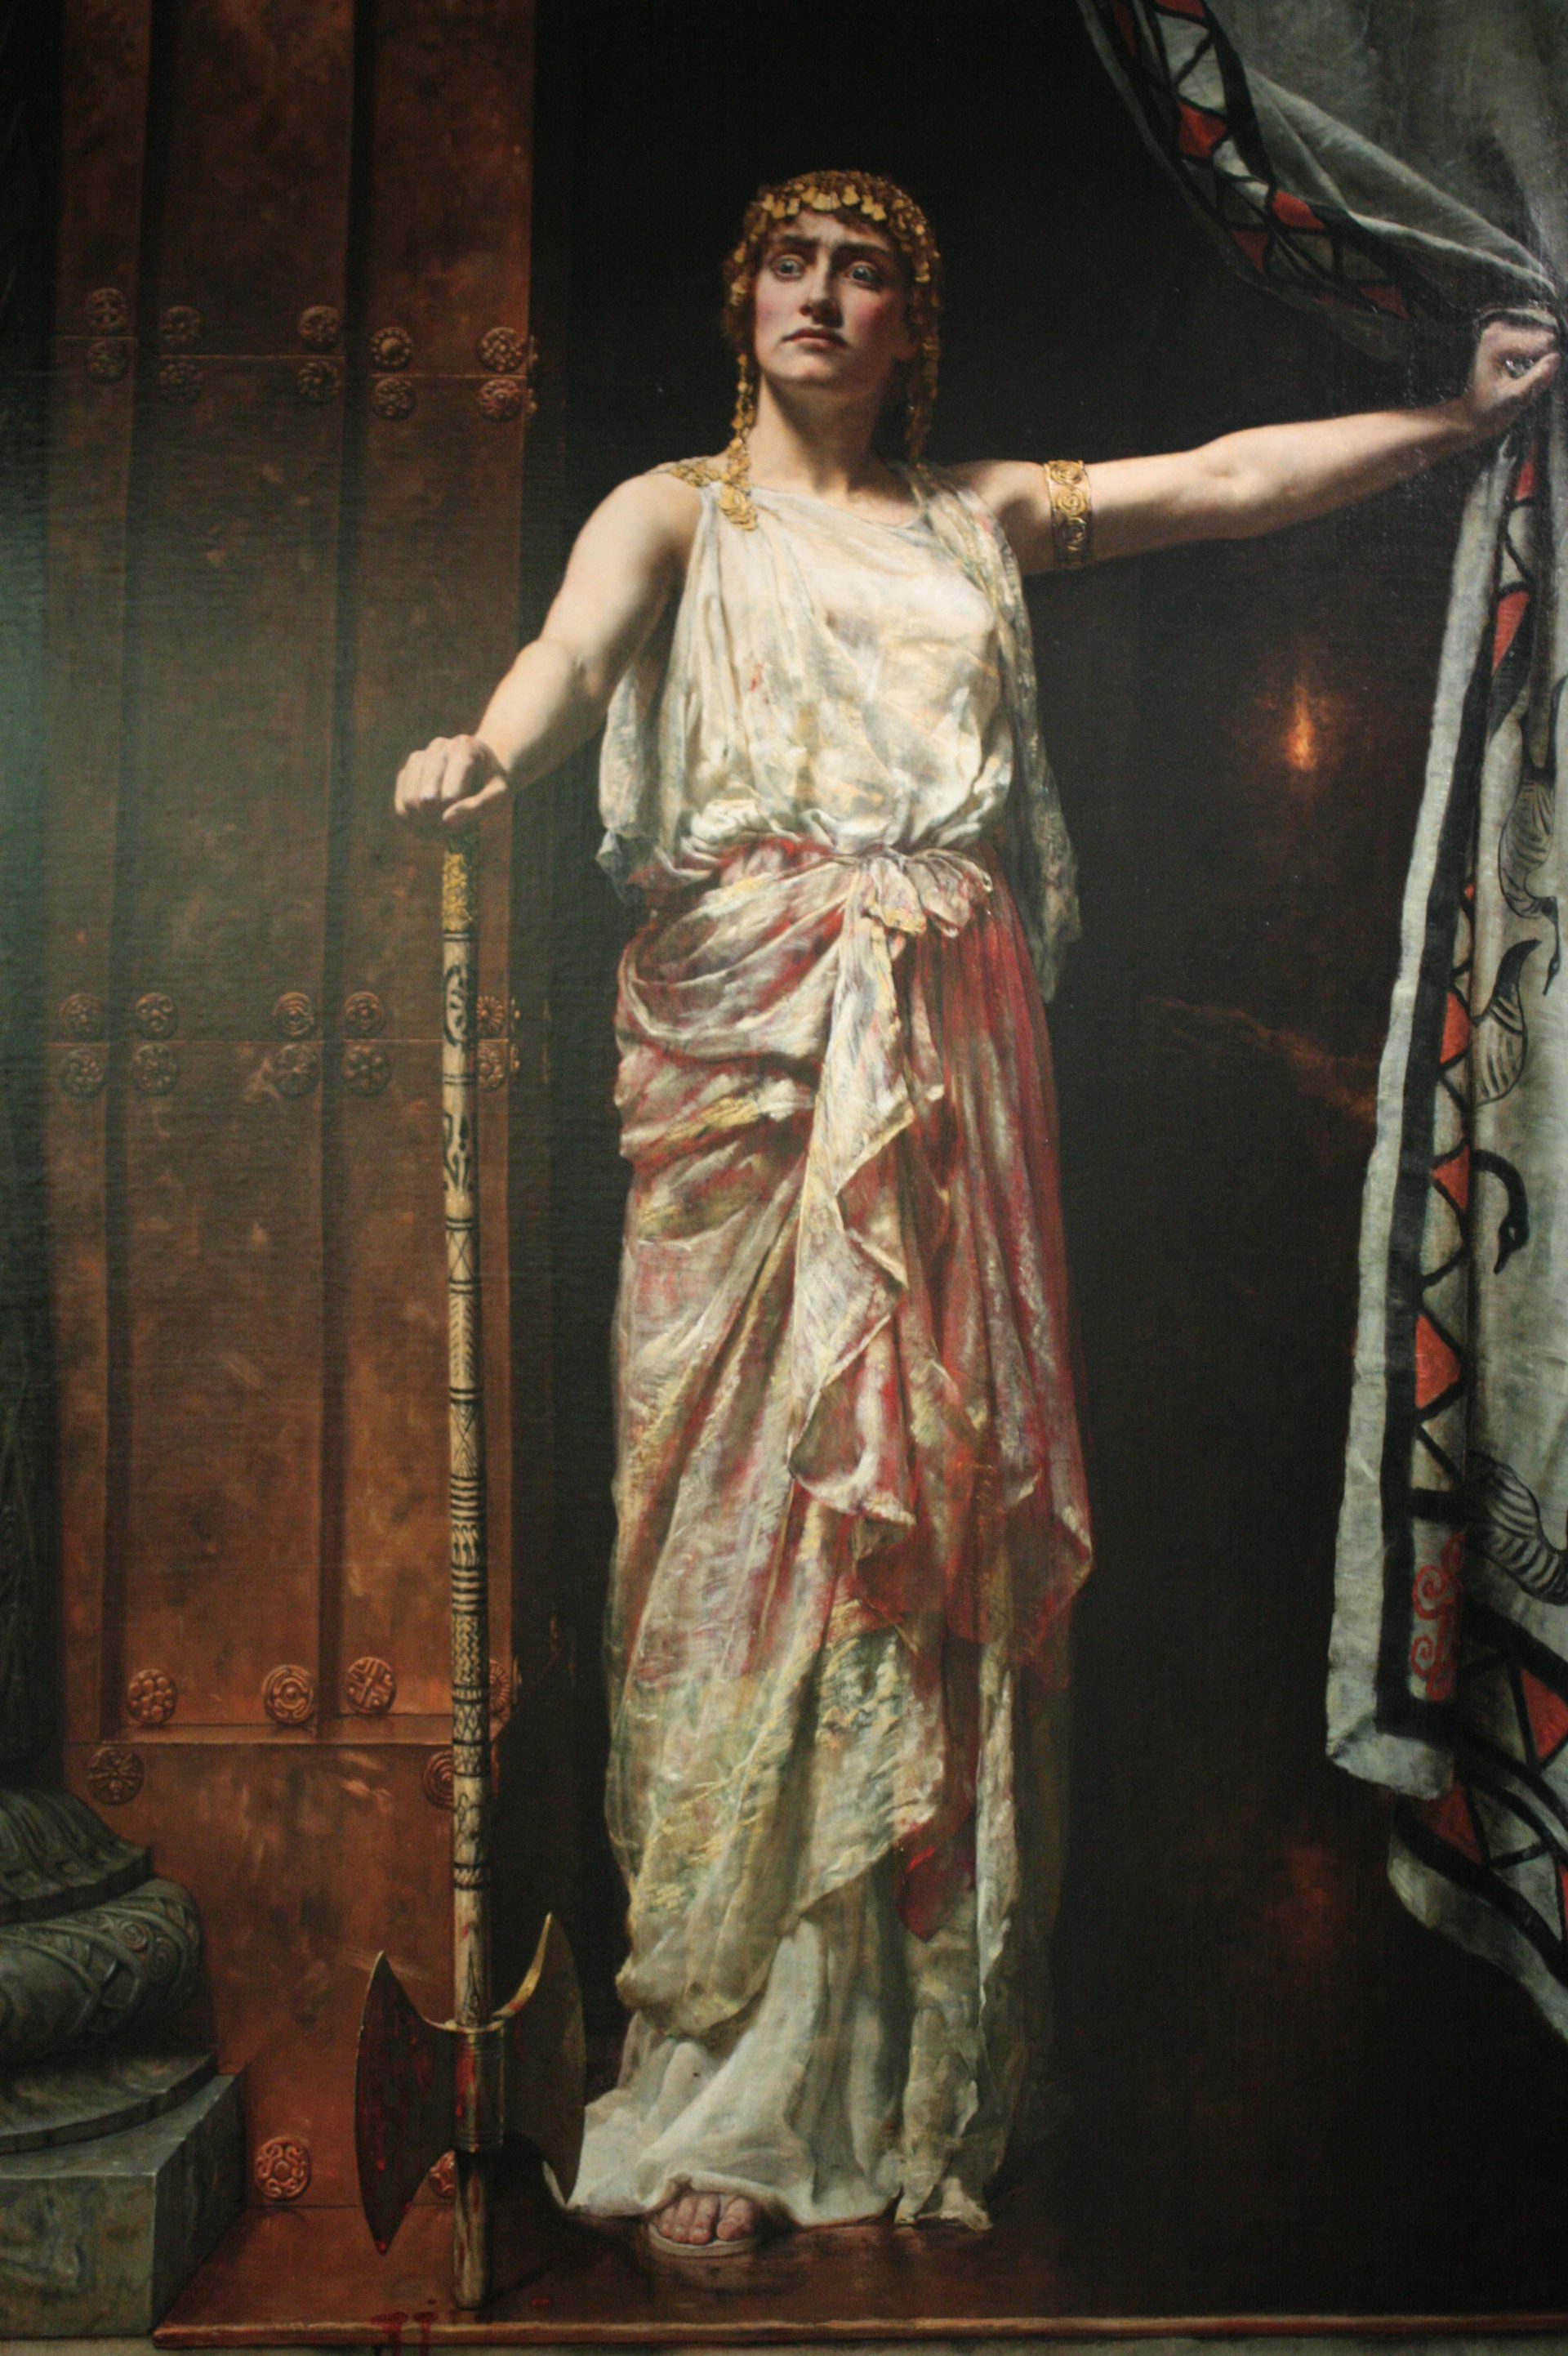 Clytemnestra after the Murder by John Collier